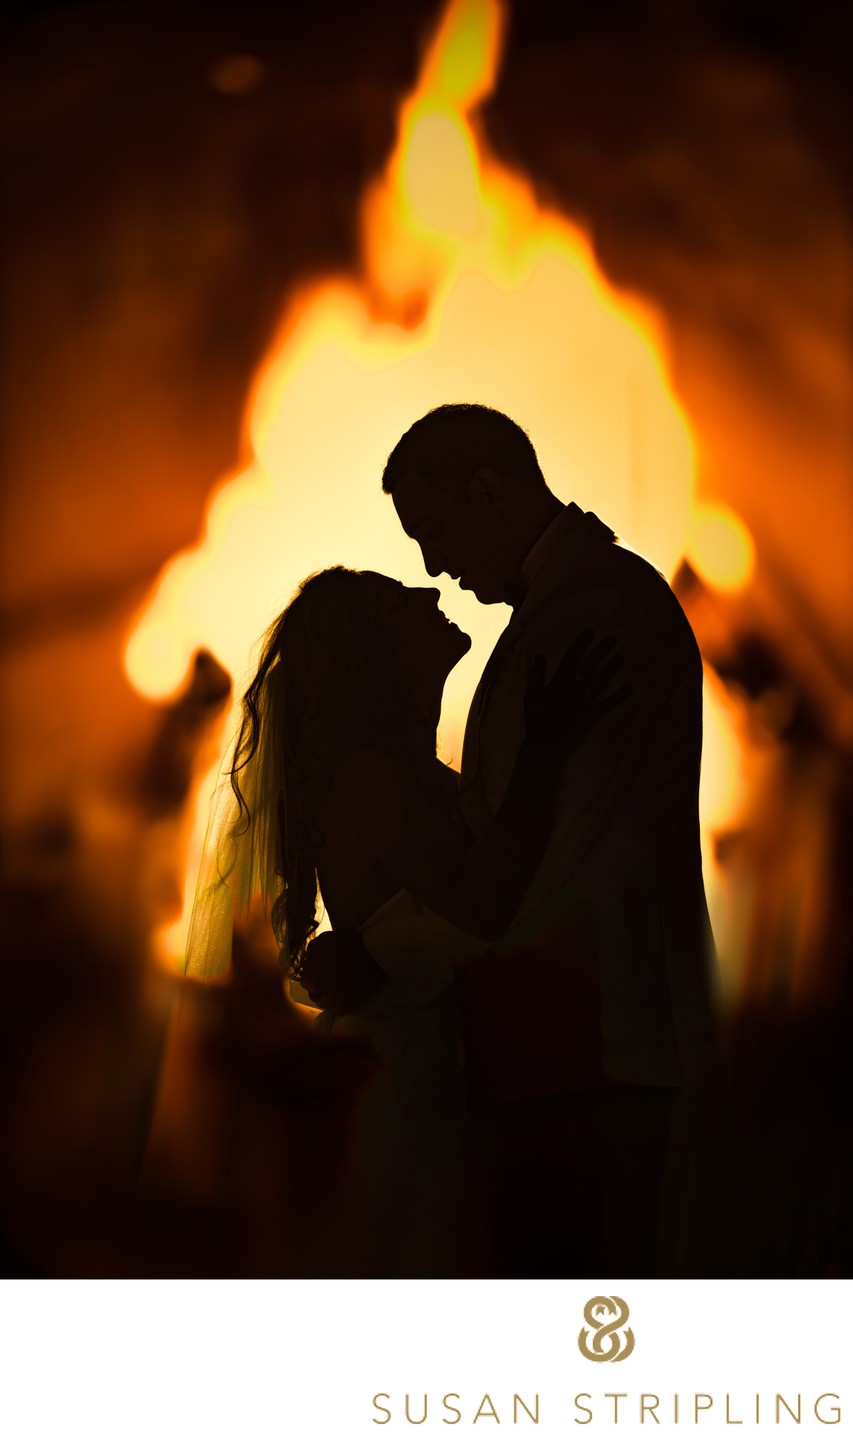 best wedding silhouette with fire